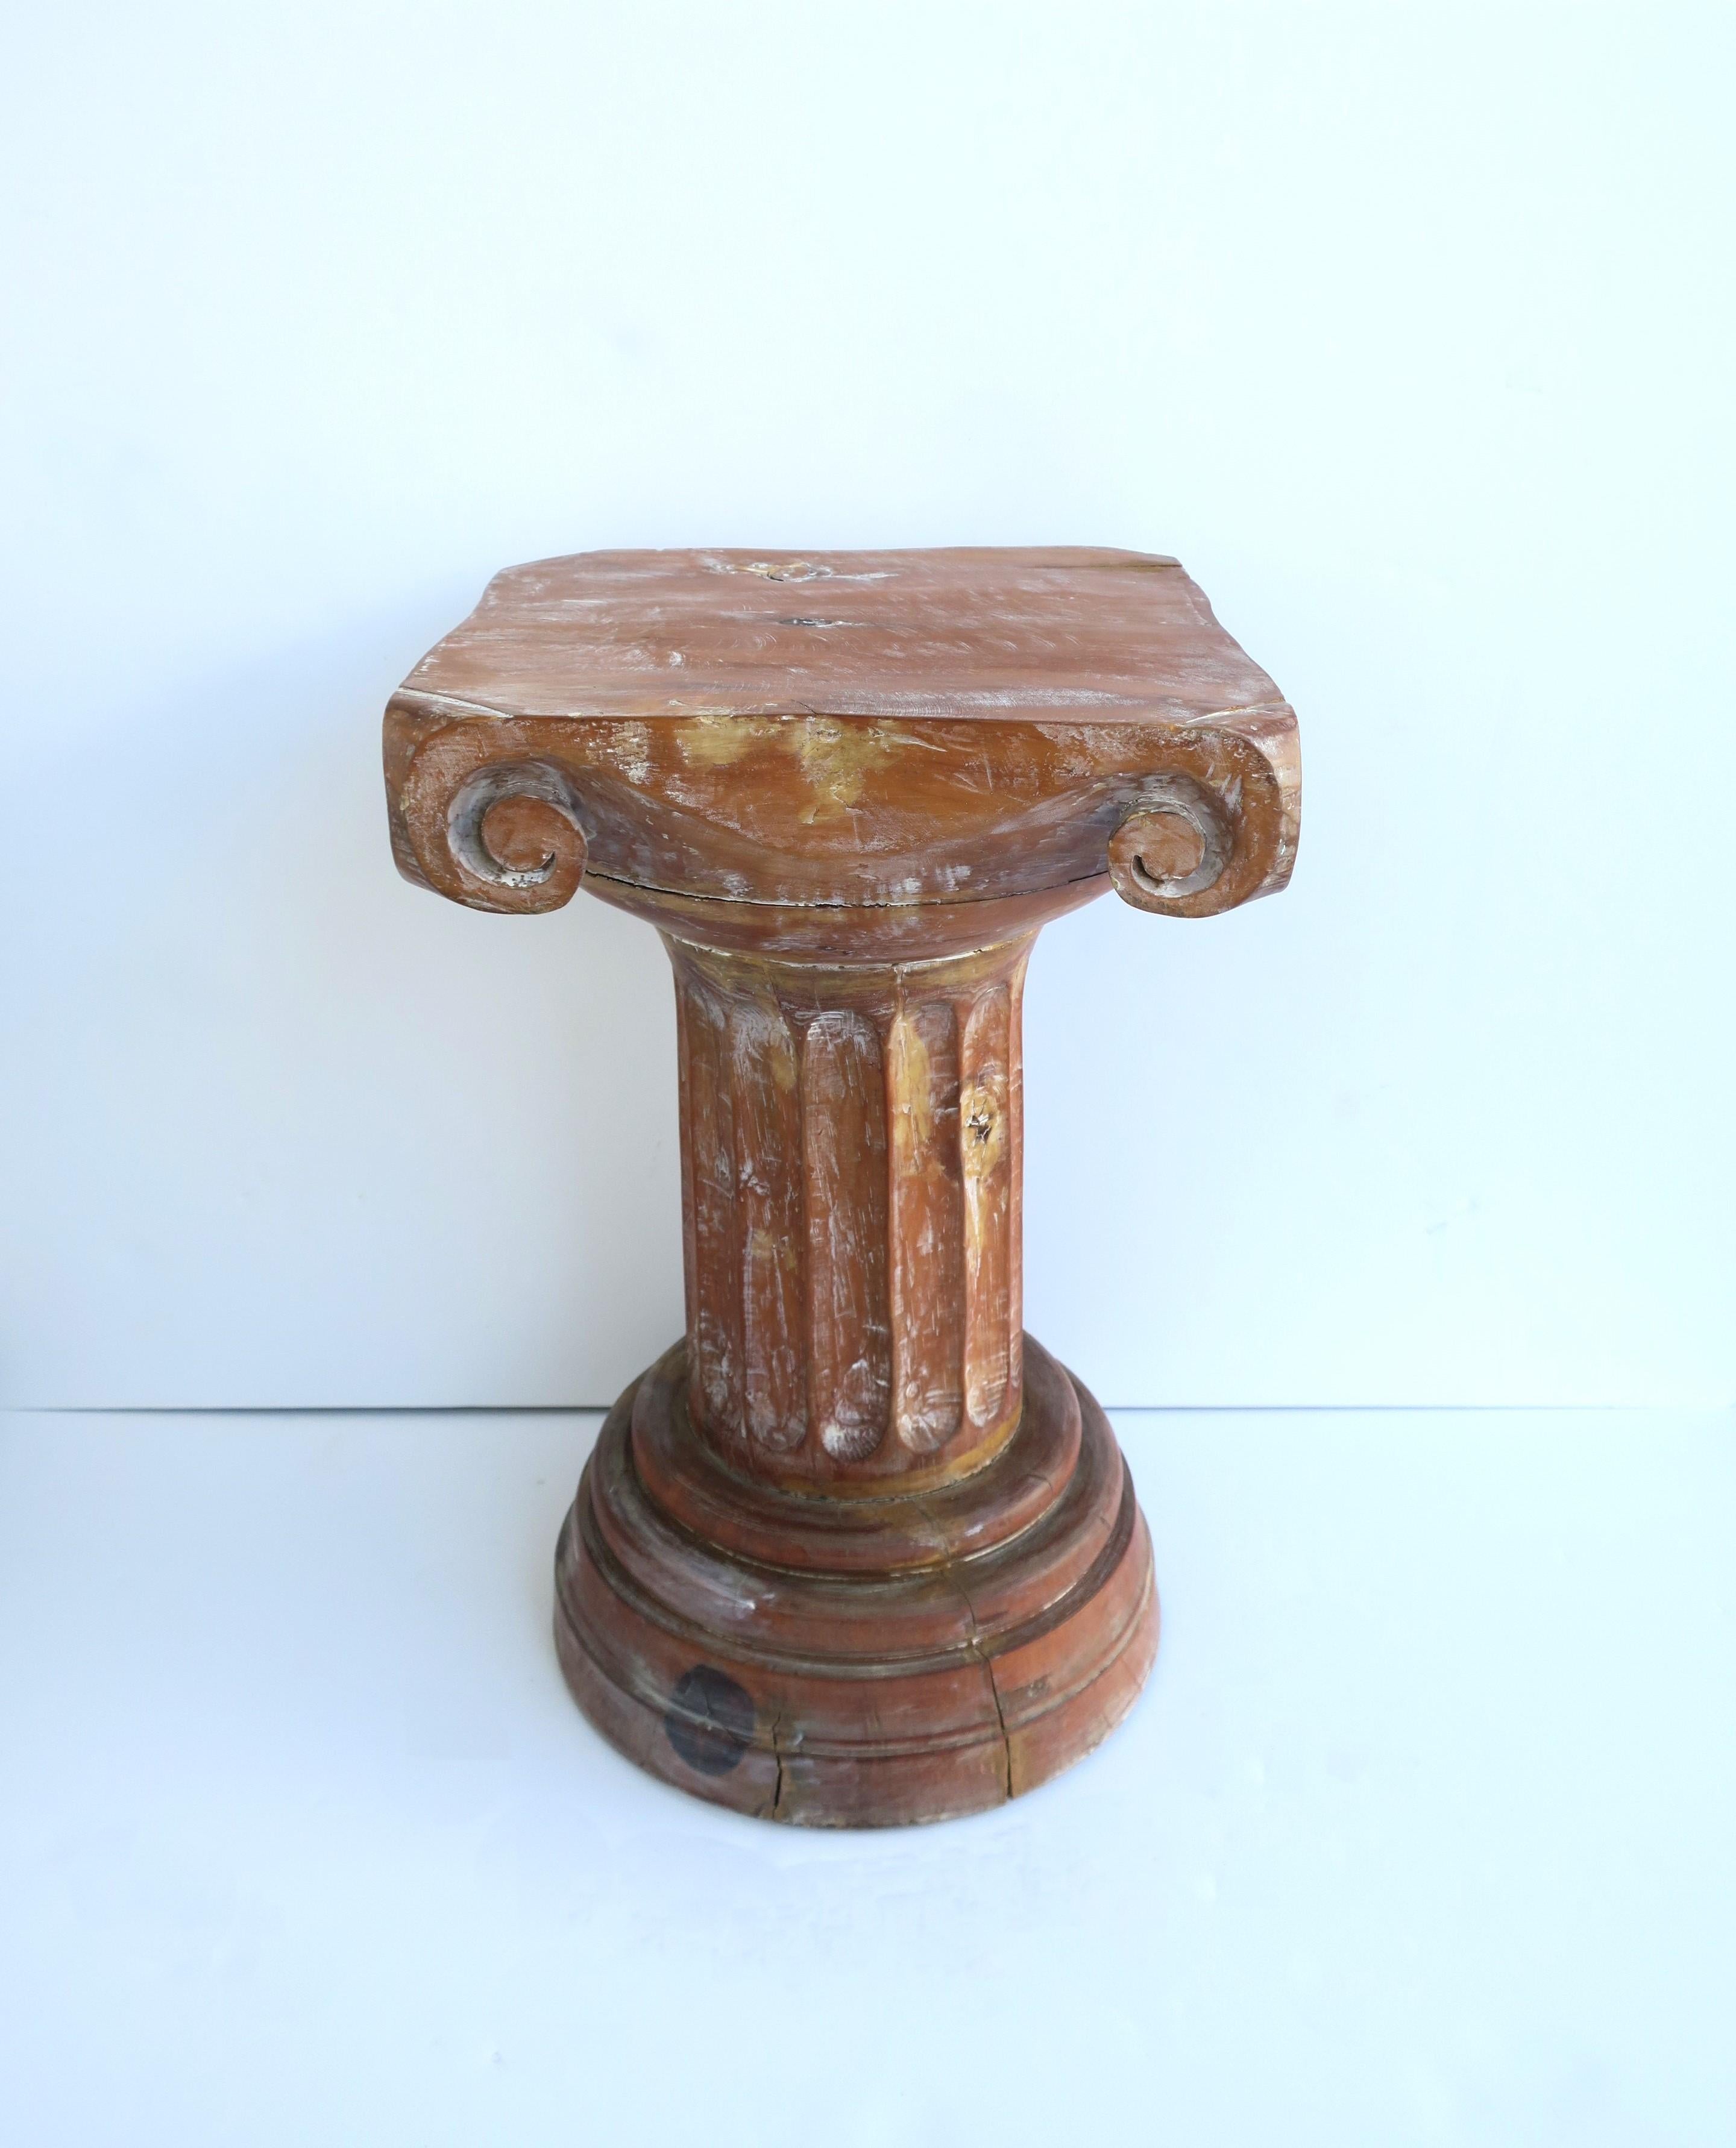 A wood 'Ionic' style column pedestal with fluted pillar and round base, in the Neoclassical Greco-Roman style, circa 20th century. Column is substantial, solid, all wood with fluted pillar center and graduated round base; great as a side/drinks